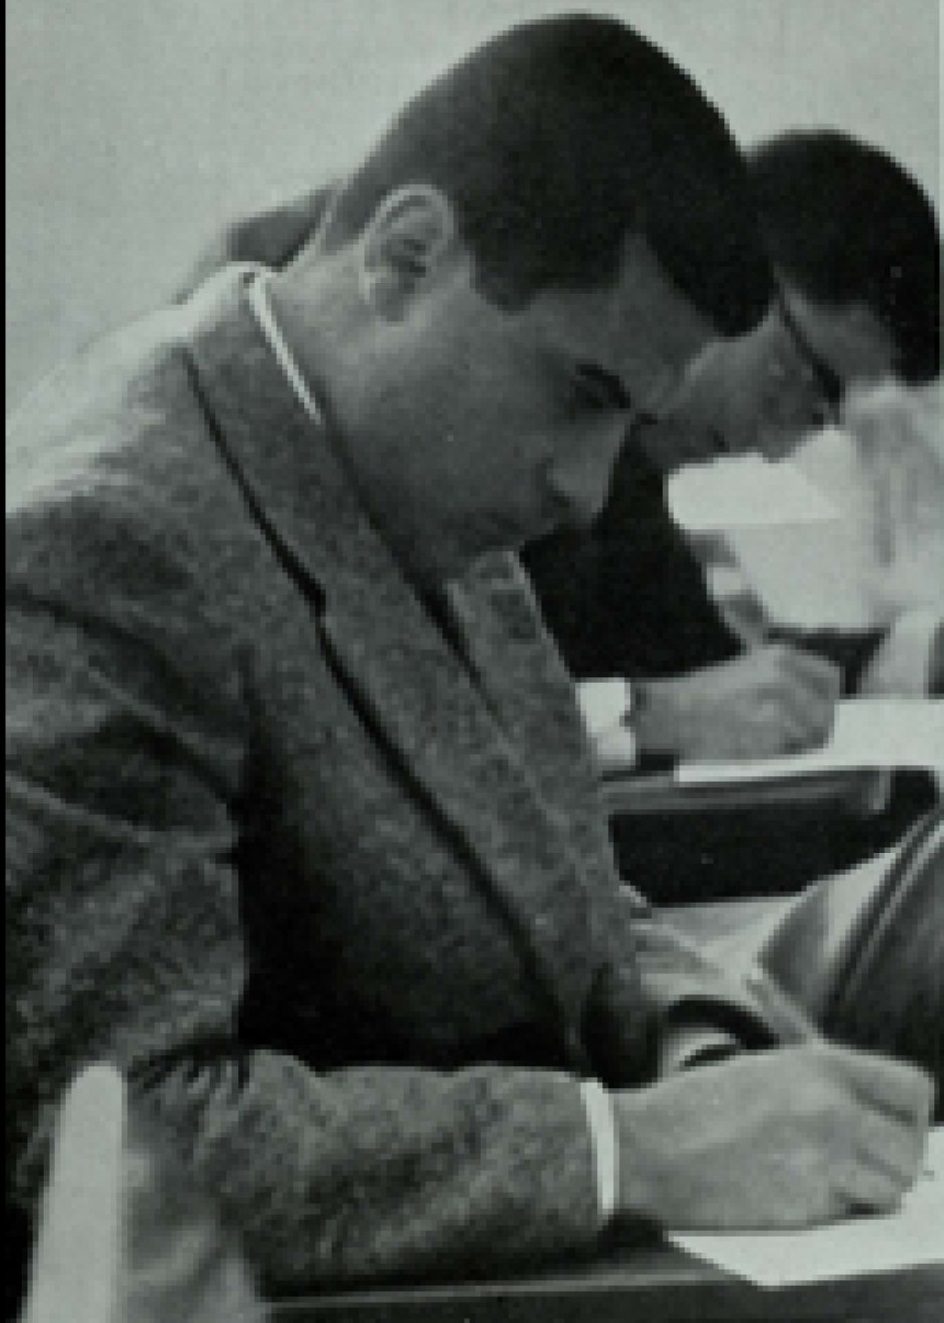 The American University of Beirut (AUB) has officially launched its documentary website in Beirut, with a photo of HE Dr. Talal Abu-Ghazaleh in his capacity as the University’s Student Council President in 1960; the year of his graduation from the AUB wit